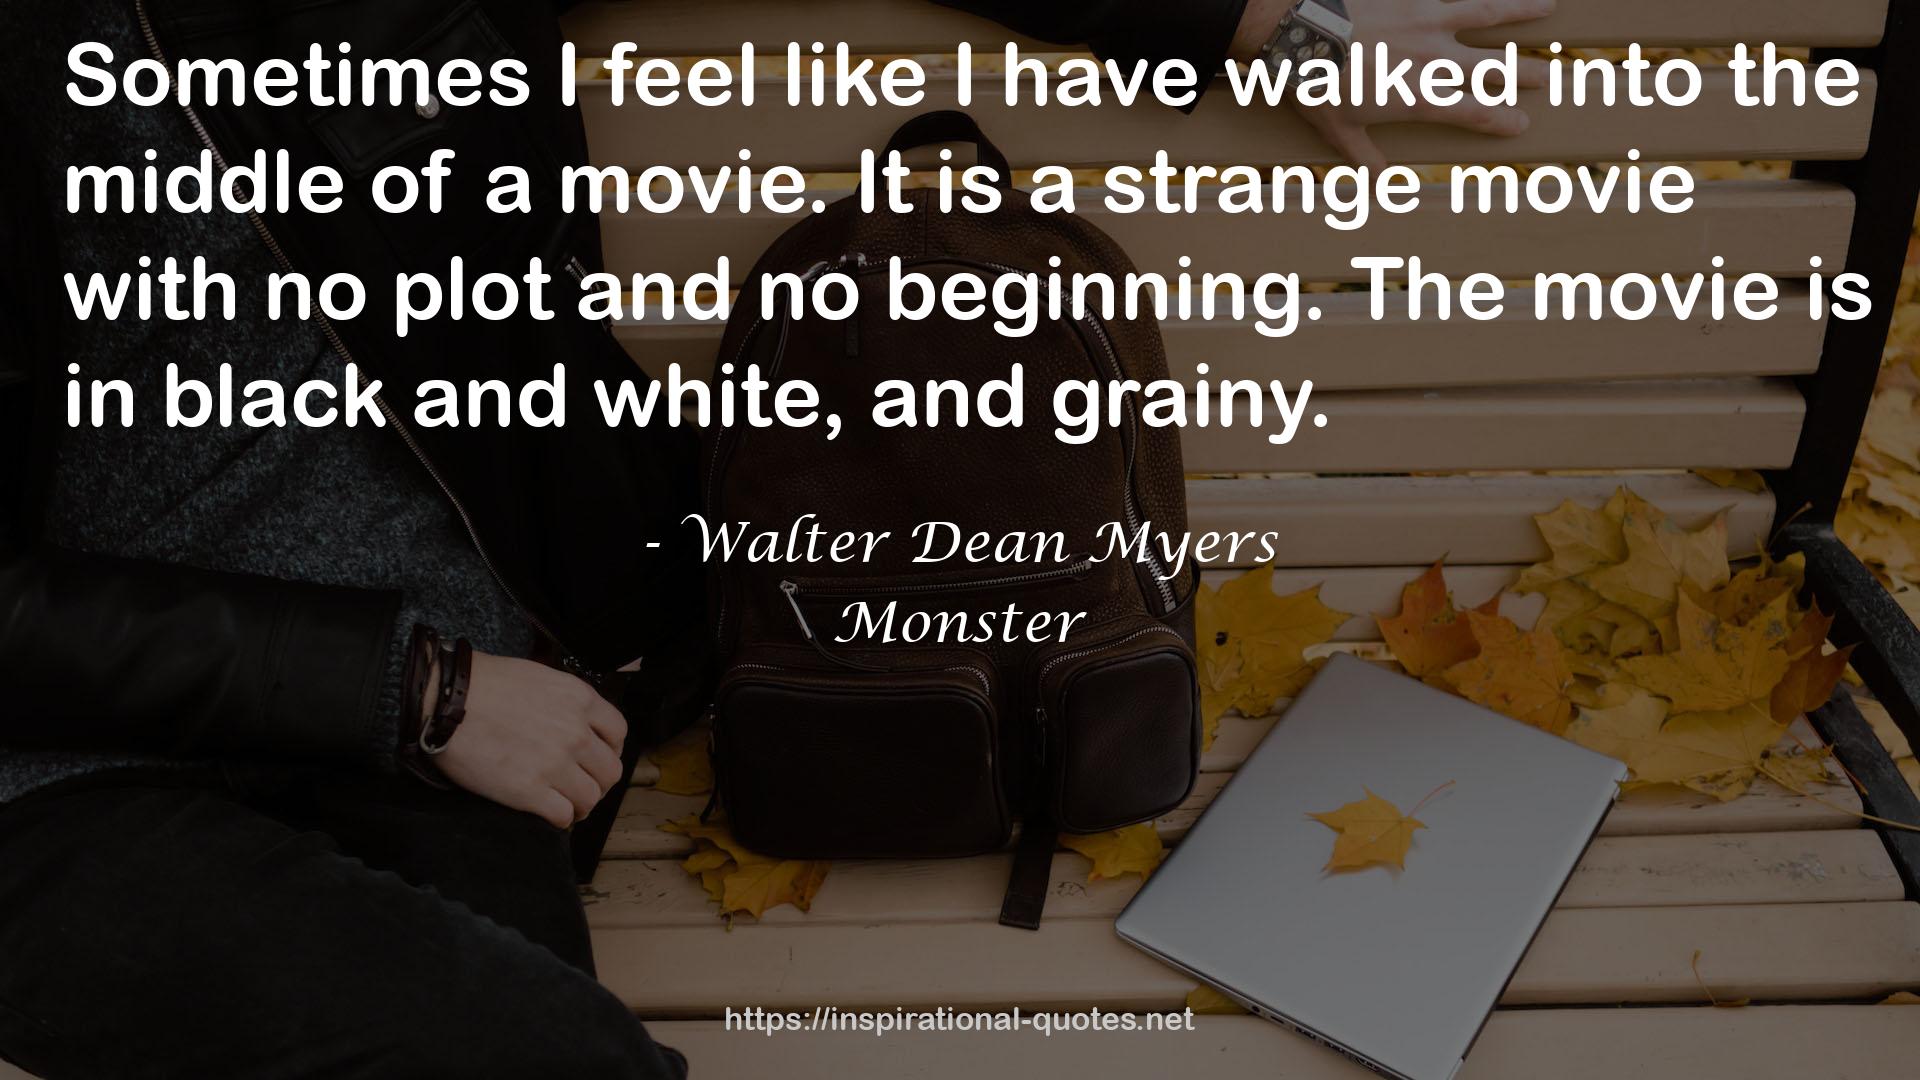 Walter Dean Myers QUOTES